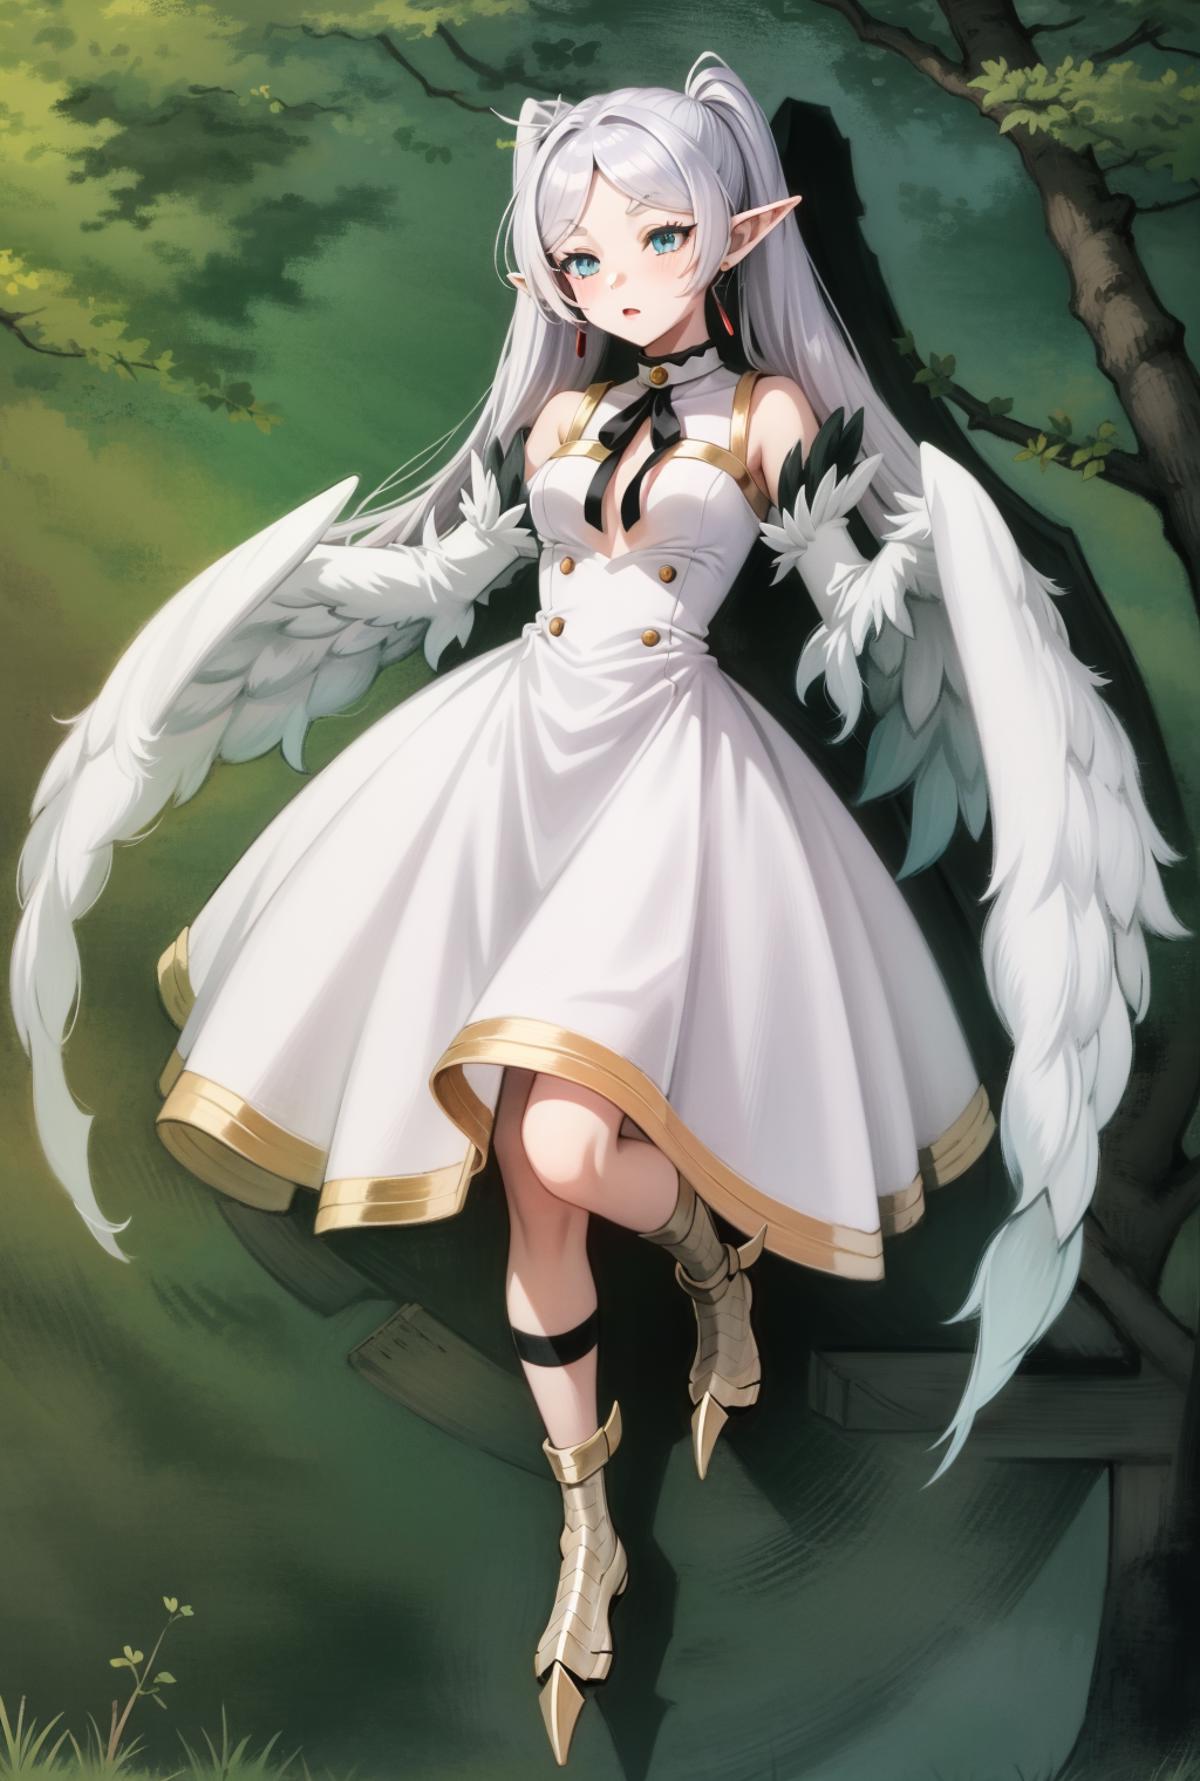 Harpy concept image by fansay